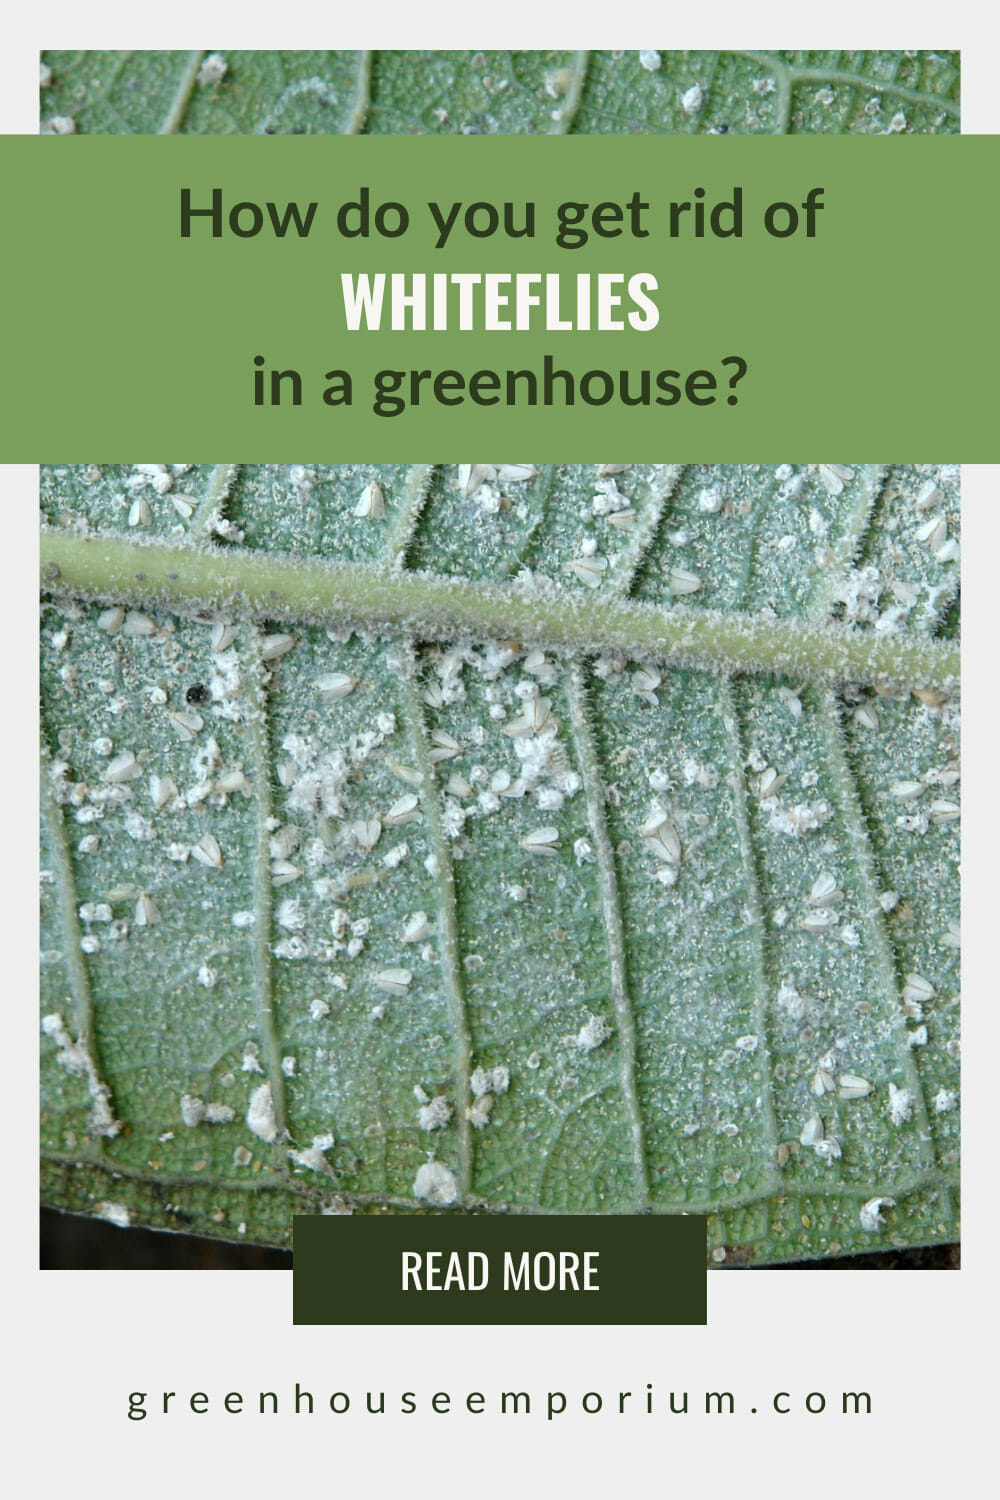 Whiteflies and eggs on leaf with text: How do you get rid of whiteflies in a greenhouse?